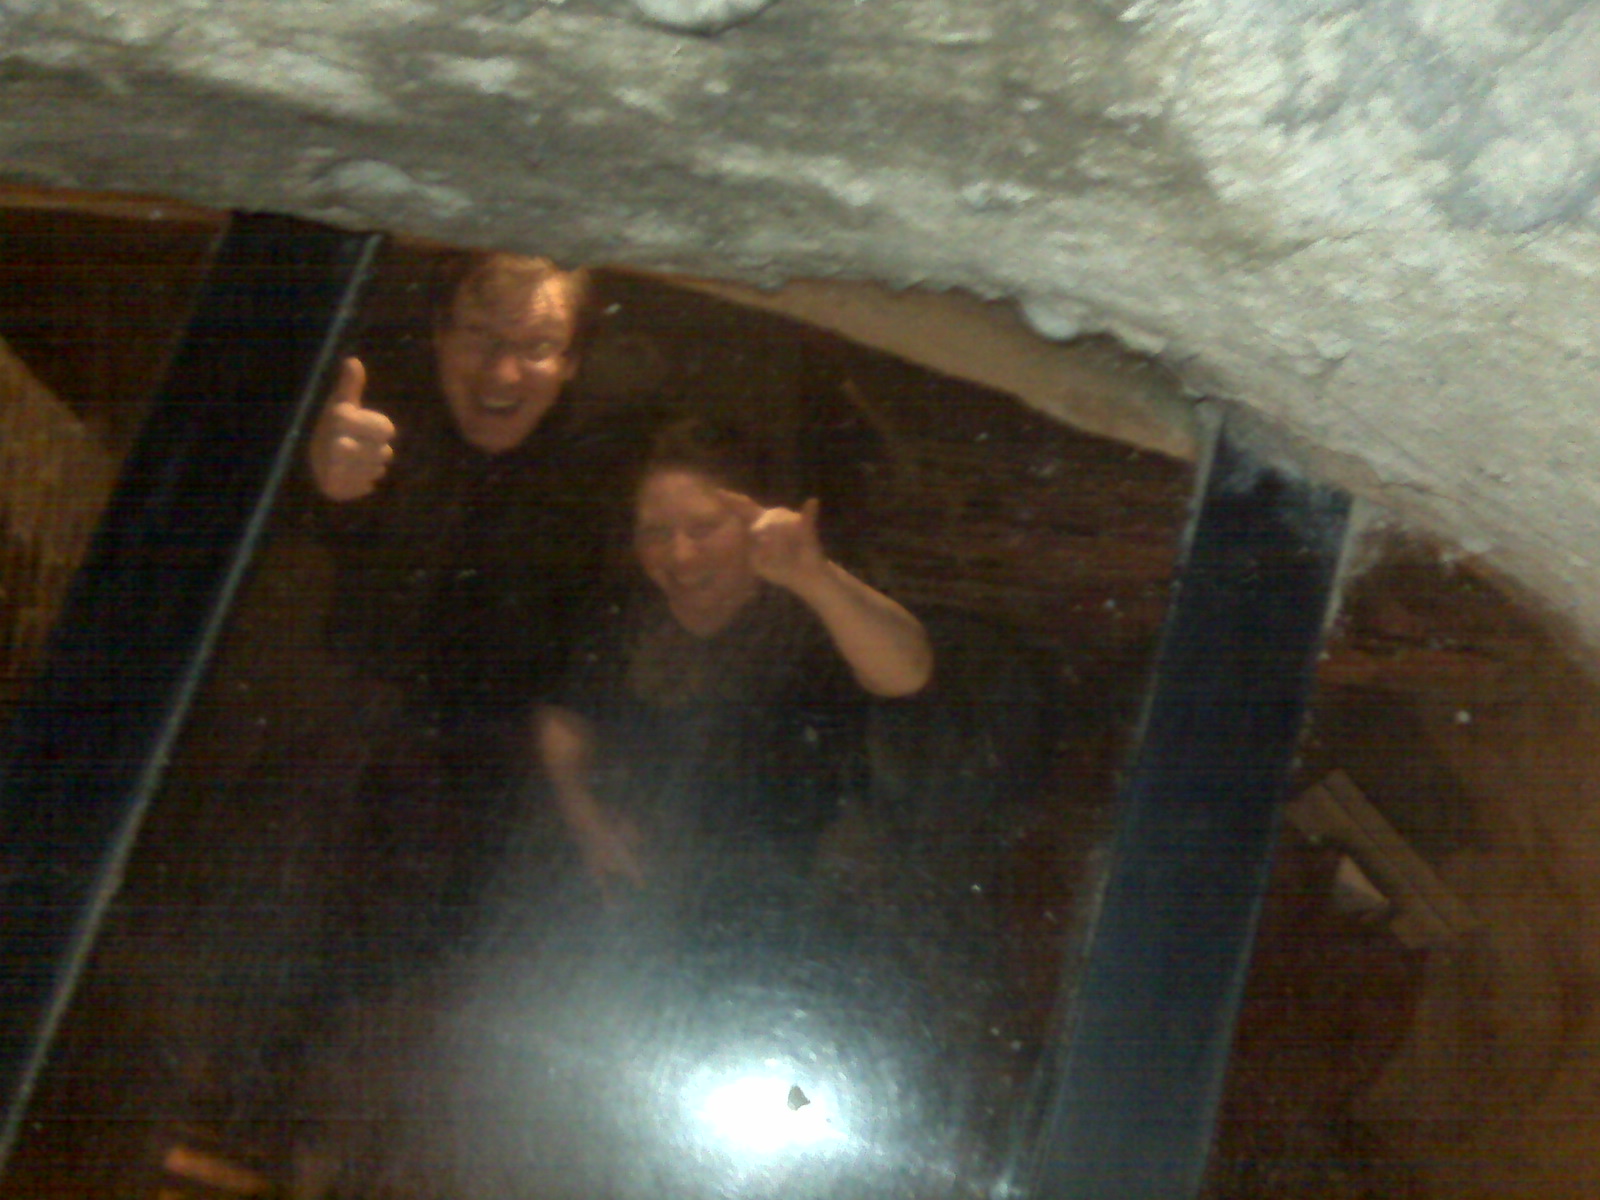 Avril and I looking through a hole in the floor, Ye Olde Trip to Jerusalem, Nottingham